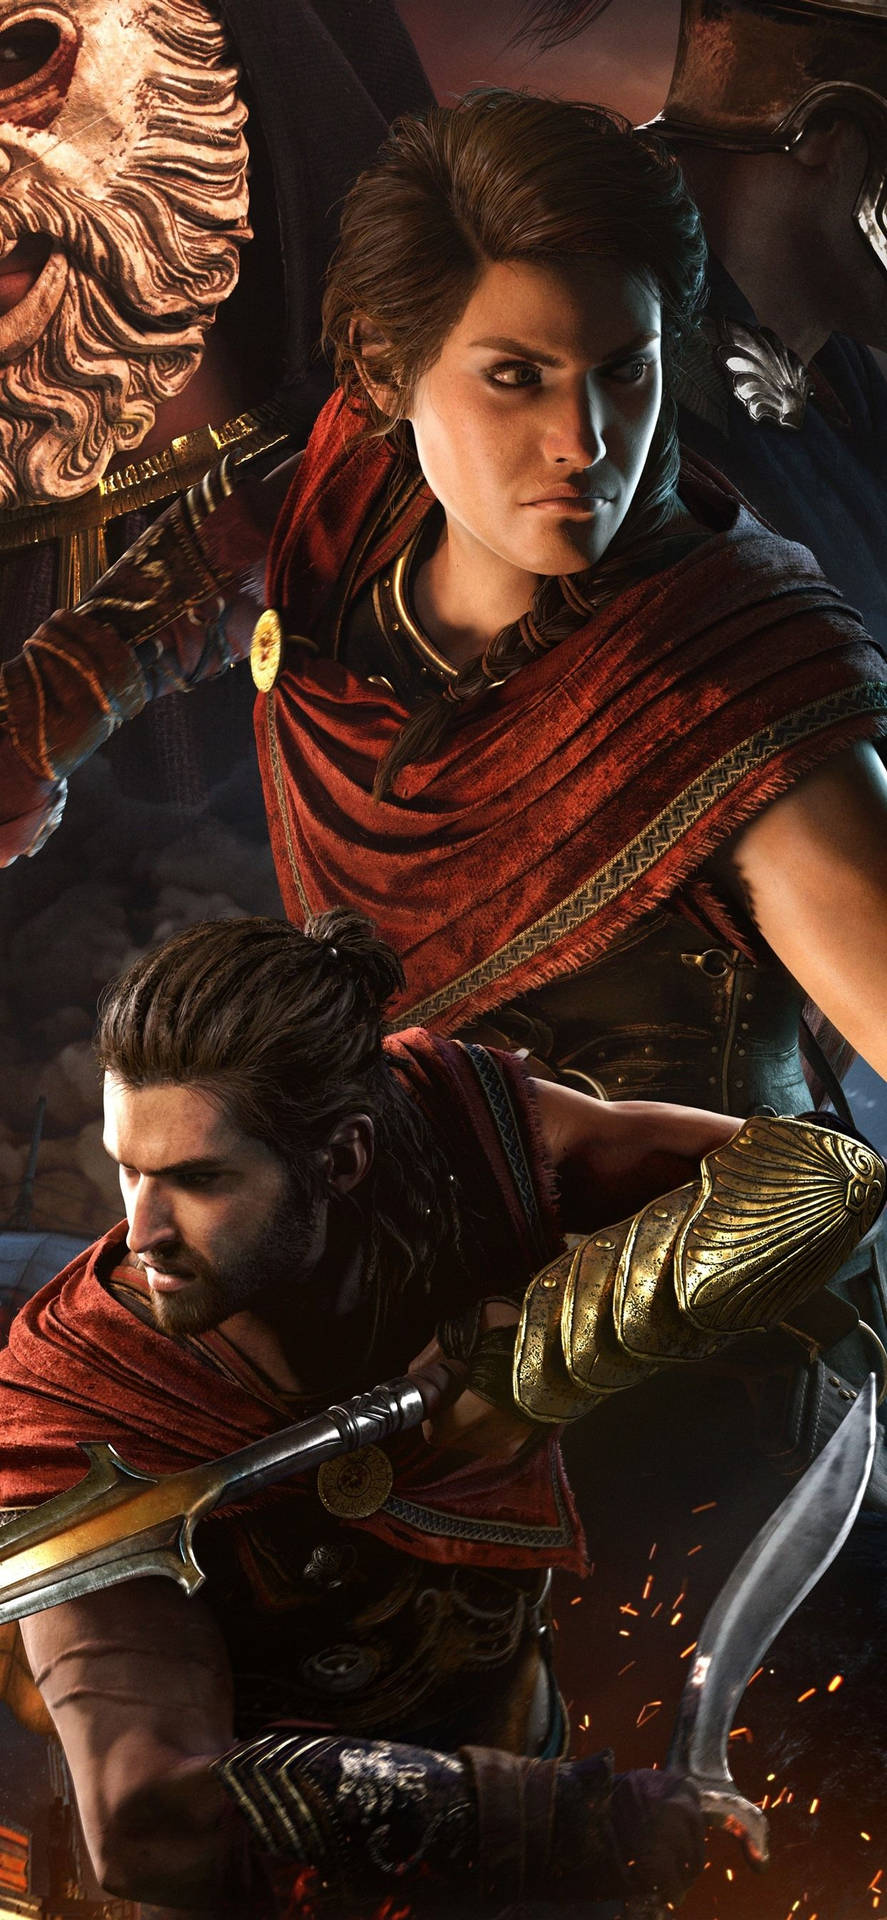 Kassandra And Alexios Of Assassin's Creed Odyssey Iphone Wallpaper